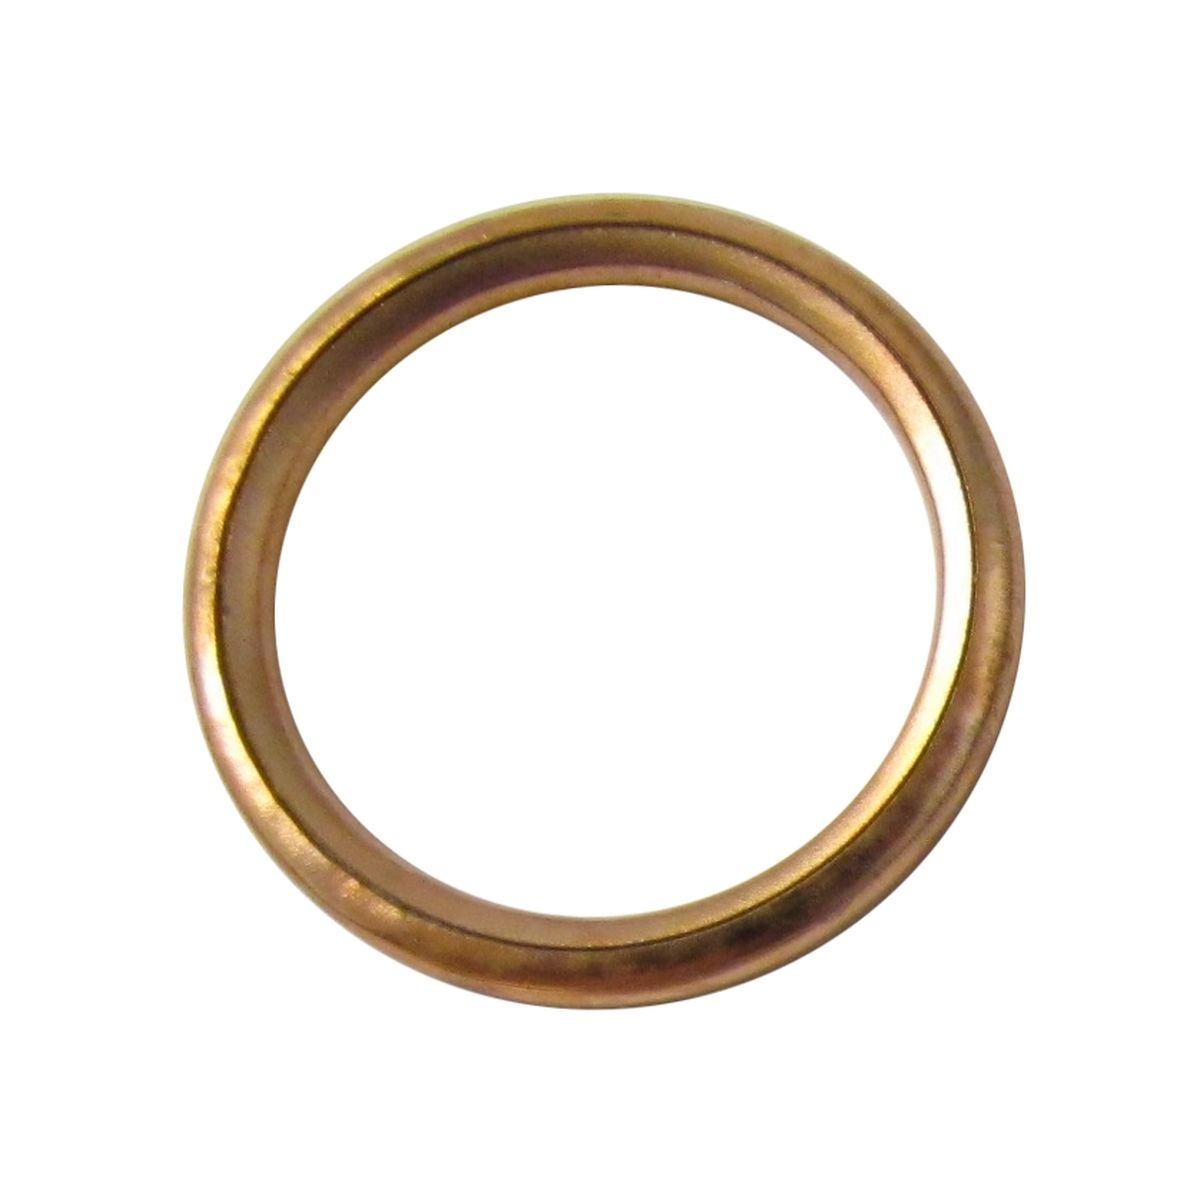 Exhaust Gasket Copper 1 for Special price for a limited time Indianapolis Mall 2002 50 Big P.G.O Max